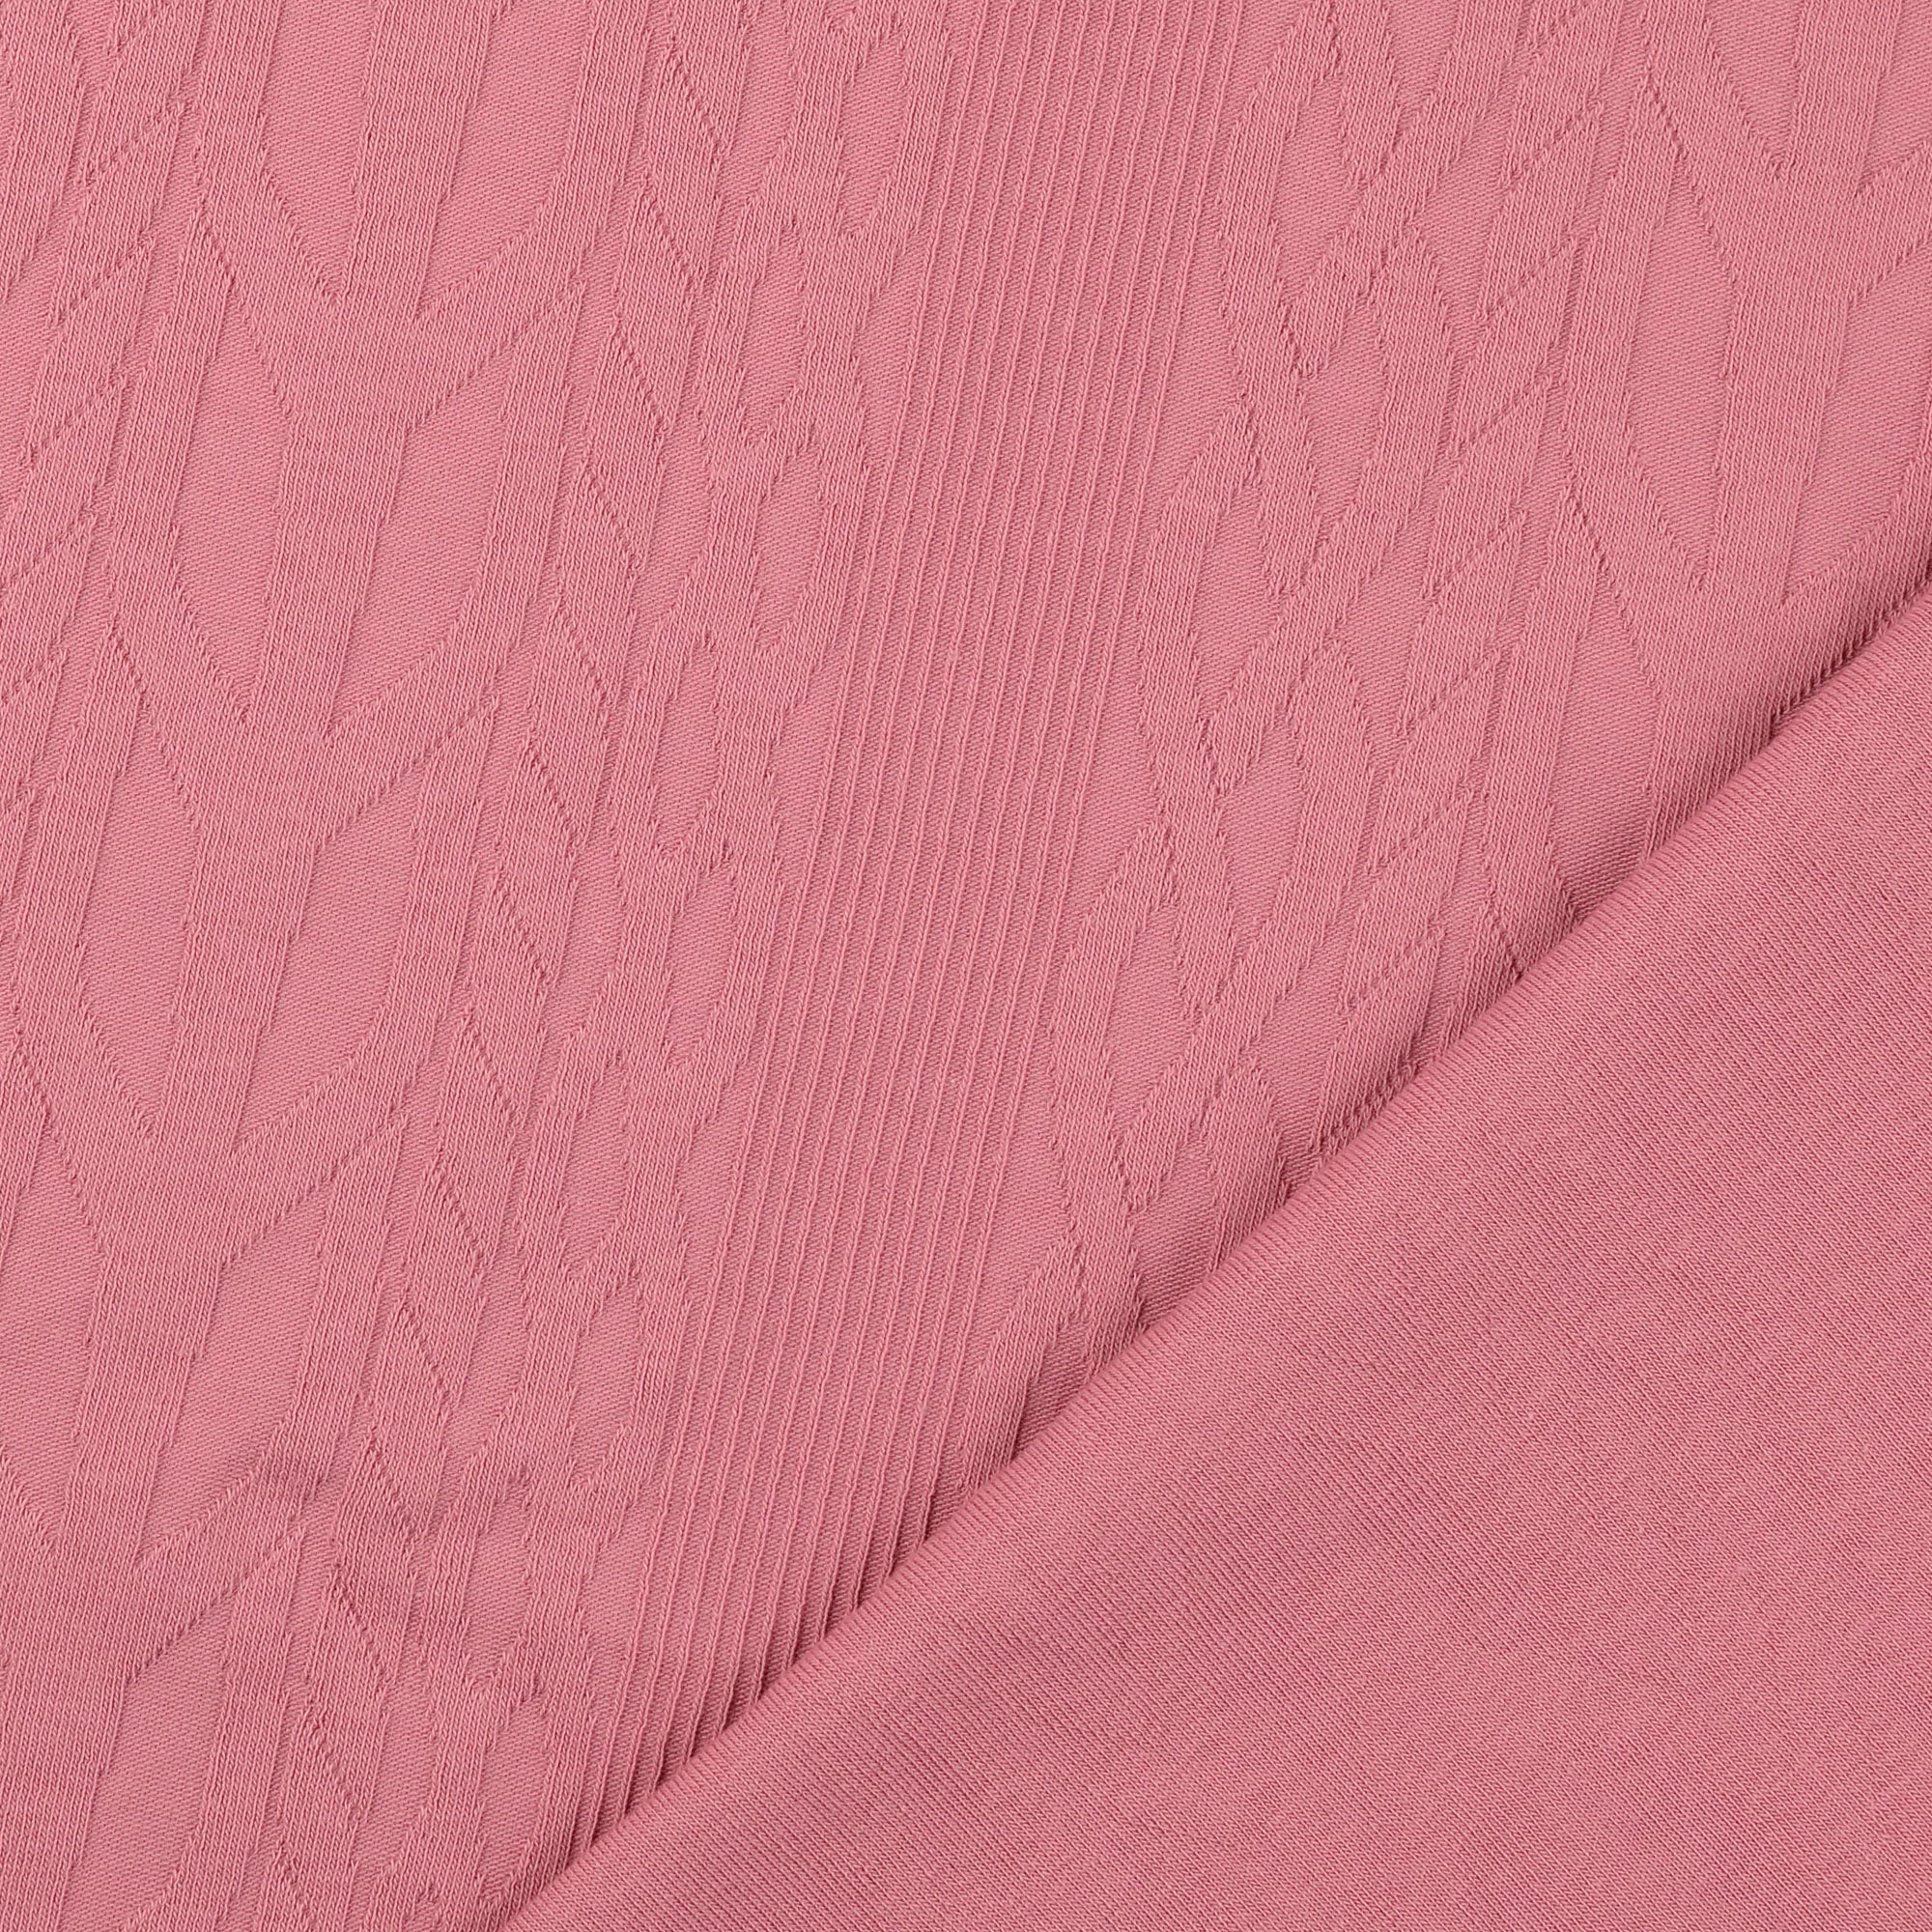 REMNANT 0.71 Metre - Cotton Cable Knit Fabric in Pink